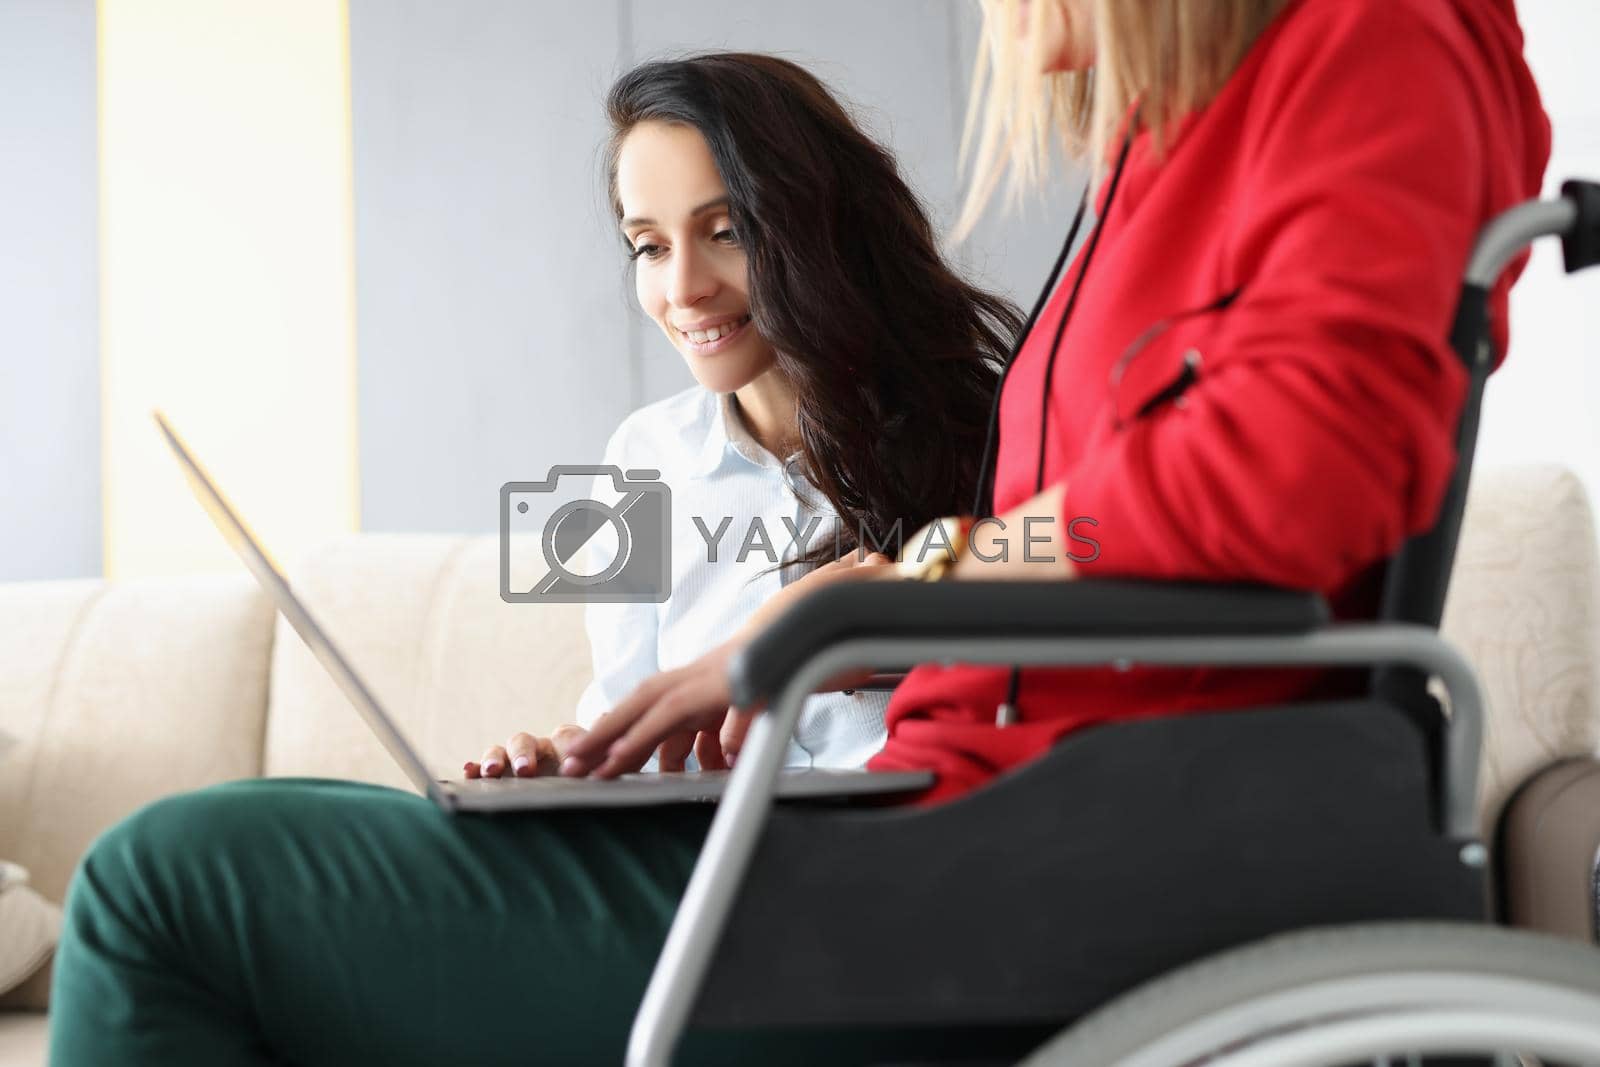 Royalty free image of Best friends spend time together watching movie on laptop, woman in wheelchair hold device on lap by kuprevich